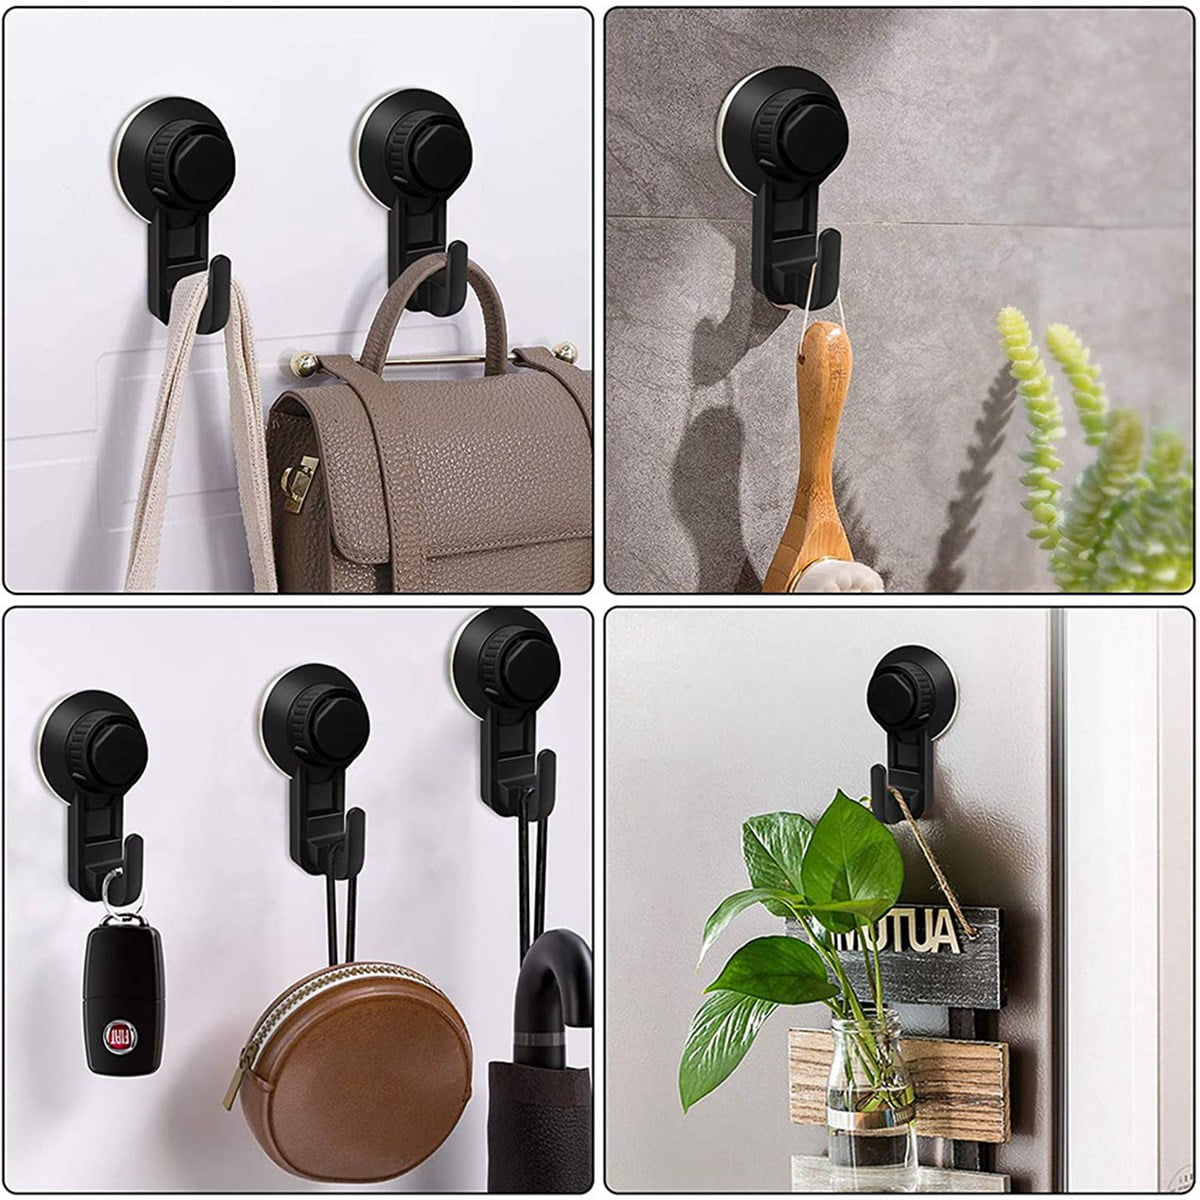 2 Pcs Suction Cup Hooks Powerful Suction Cup Bathroom Hooks,Vacuum Wall Hooks for Towel,Waterproof Shower Hooks